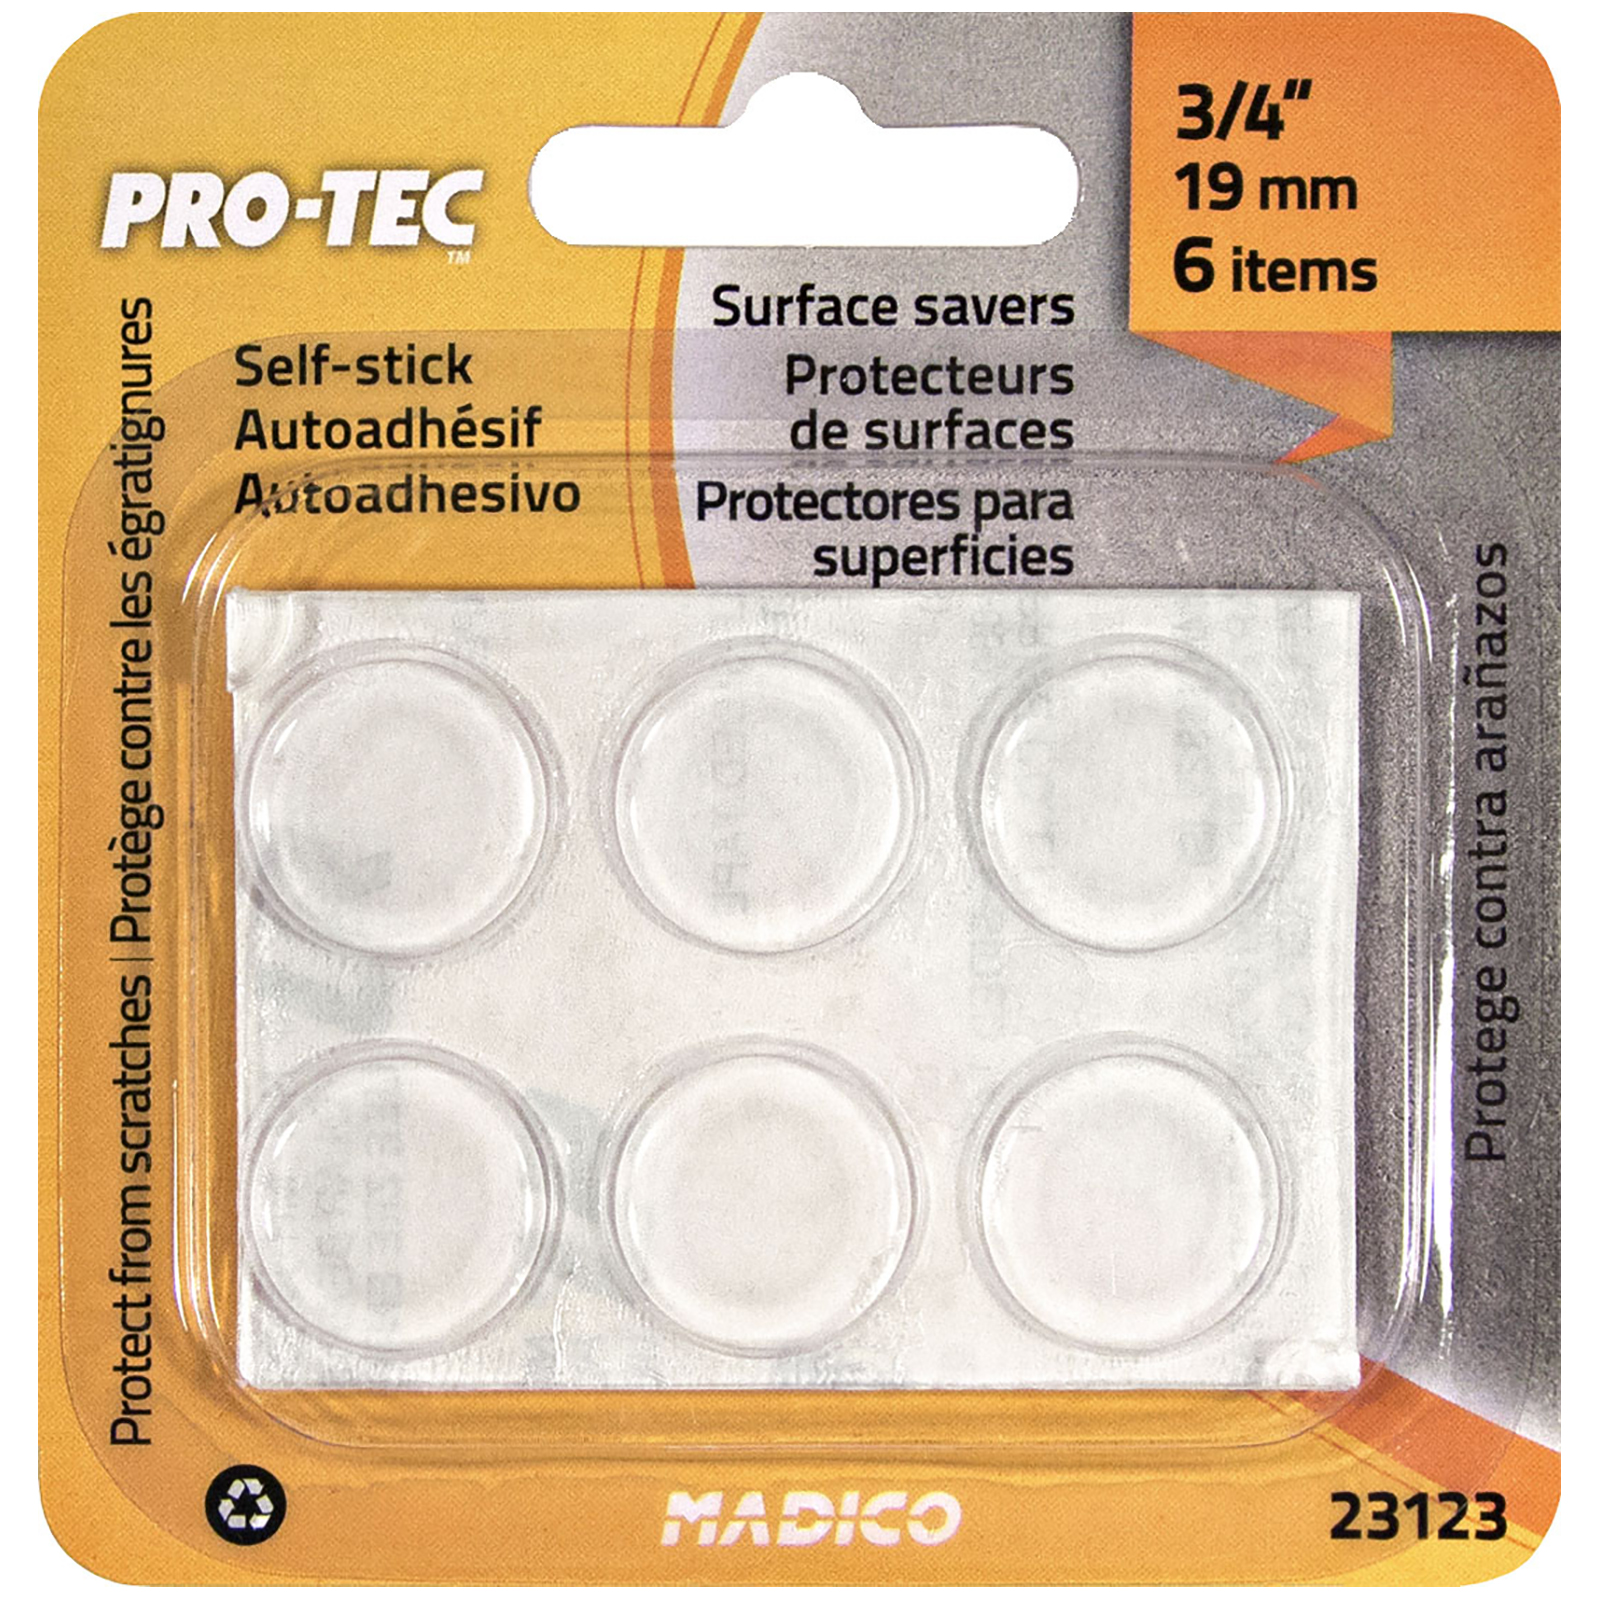 Madico 19mm Clear Self-Stick Protec Surface Savers - 6 Pack